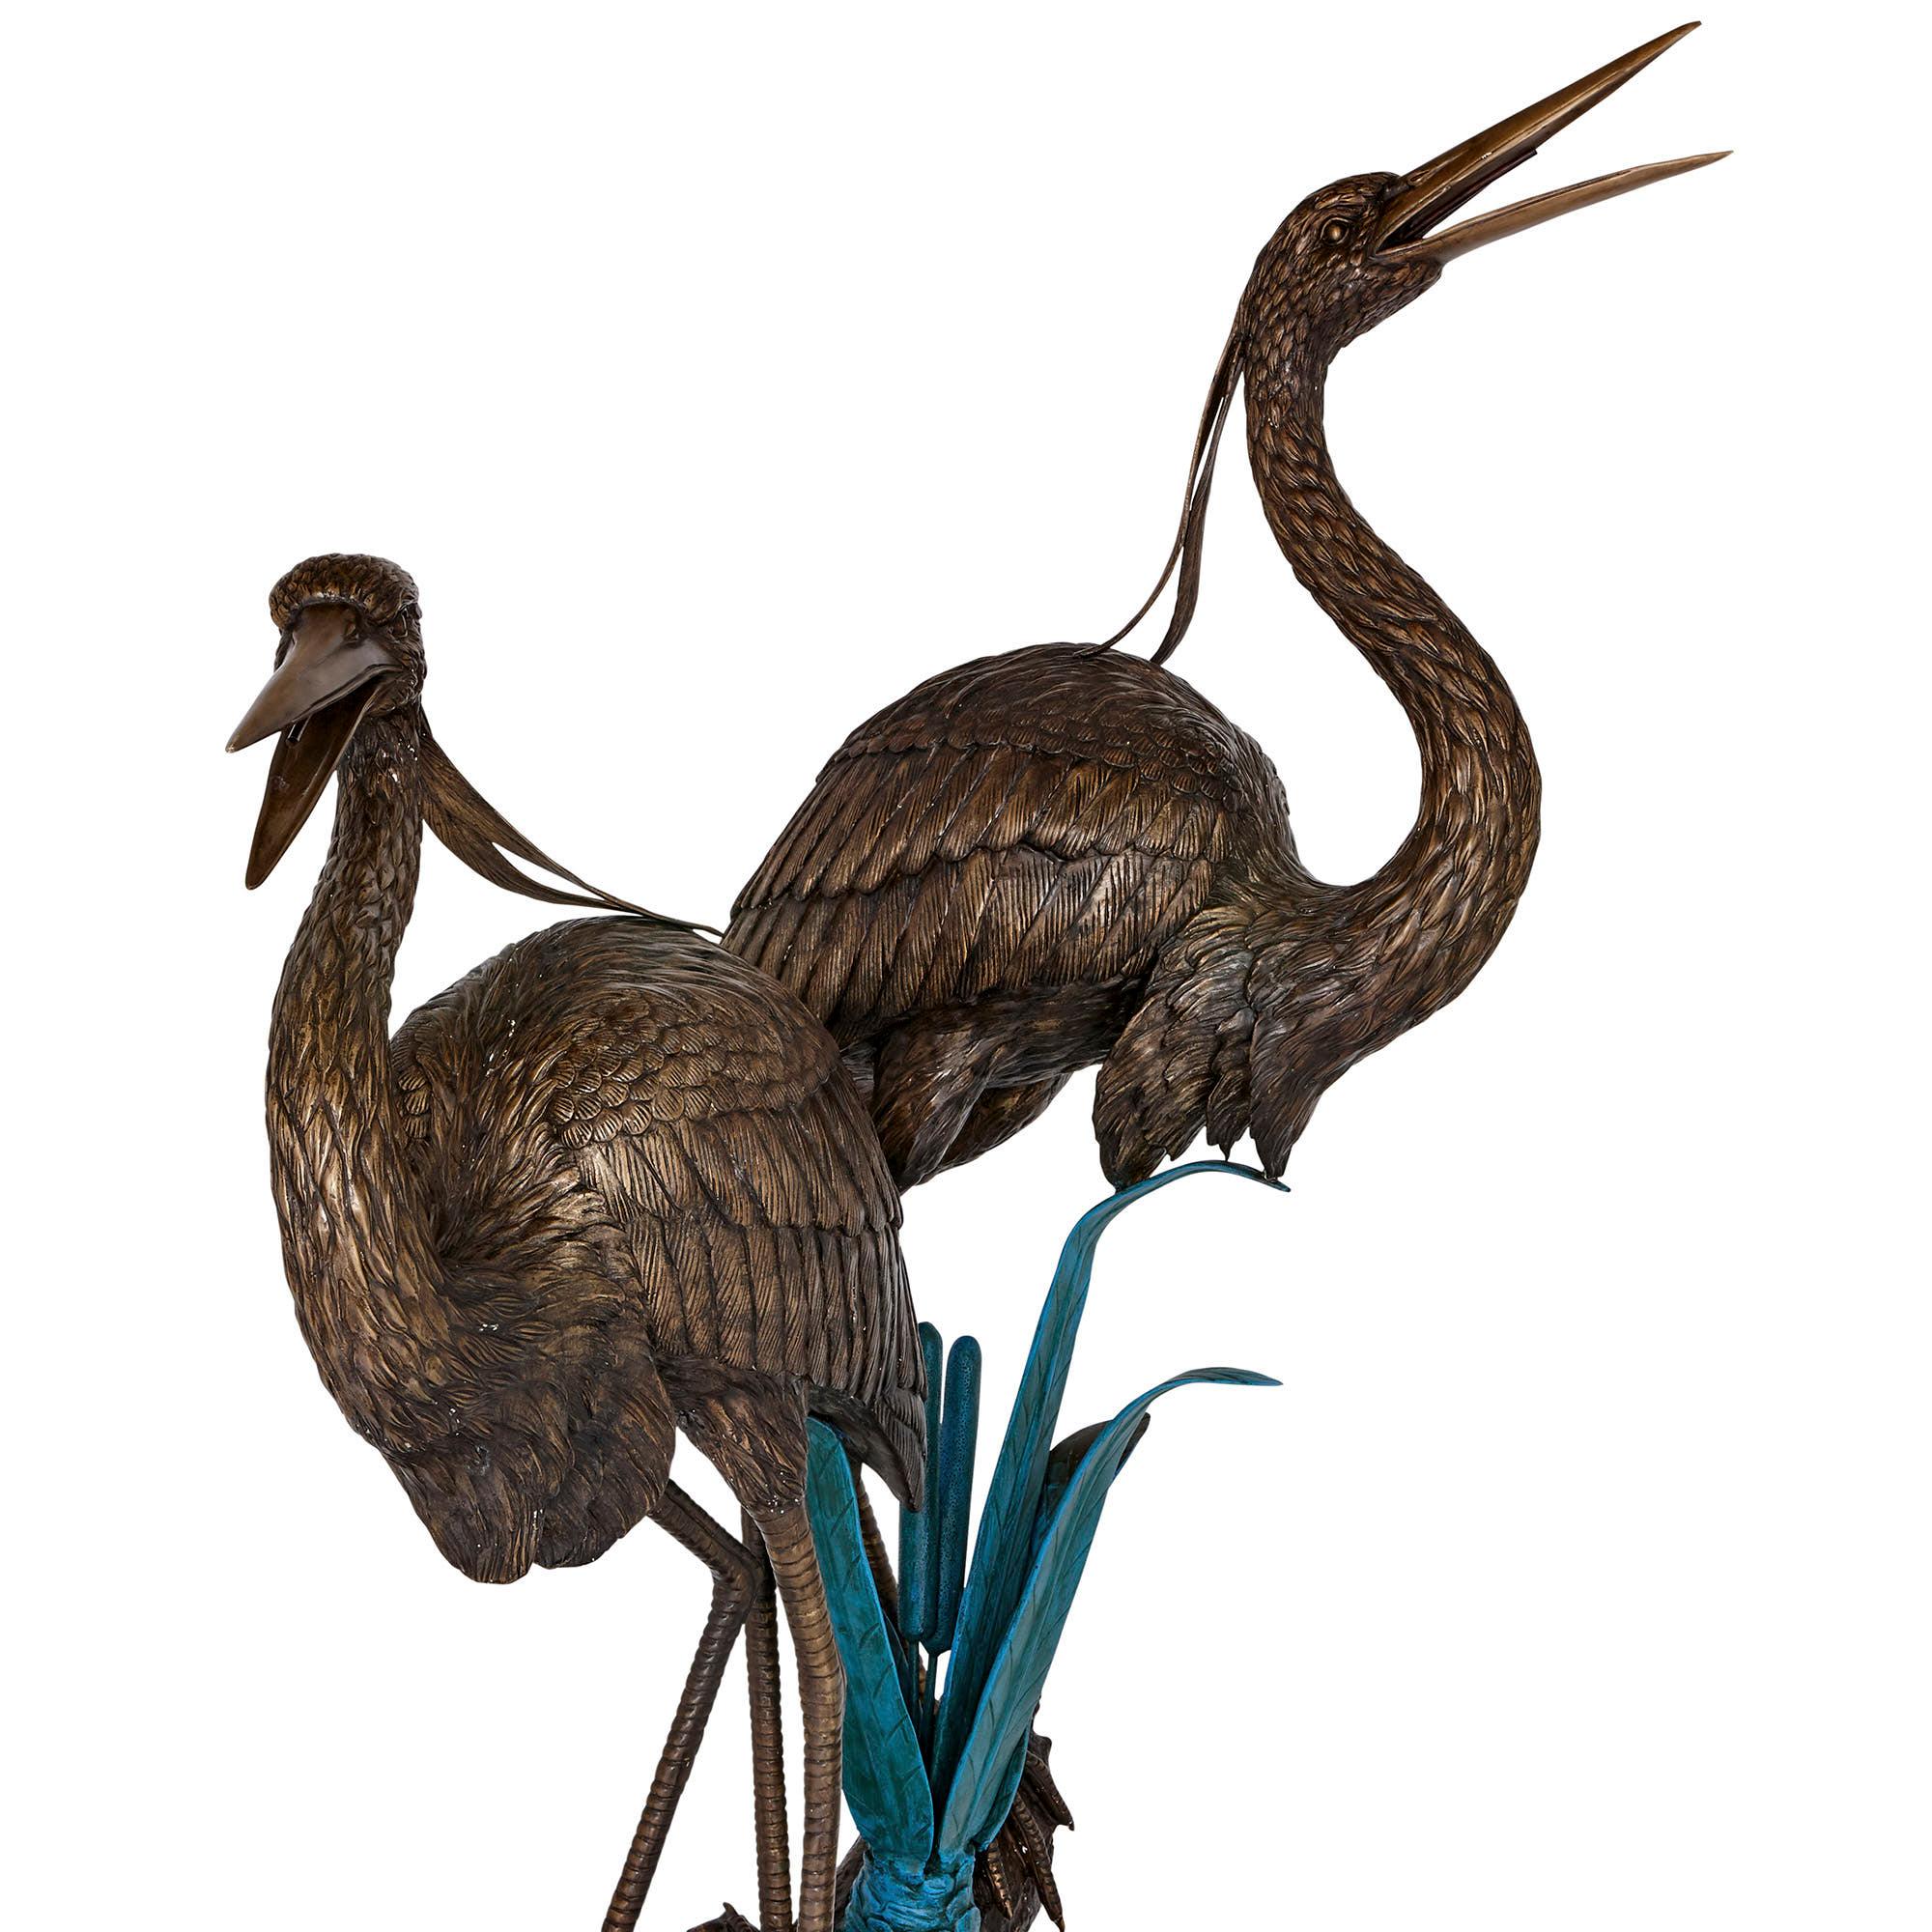 This wonderful patinated bronze work is designed to function as both a water fountain and a superb piece of sculpture. The item will be well-suited to either an indoor or outdoor setting.

The piece takes the form of two herons (birds), perched on